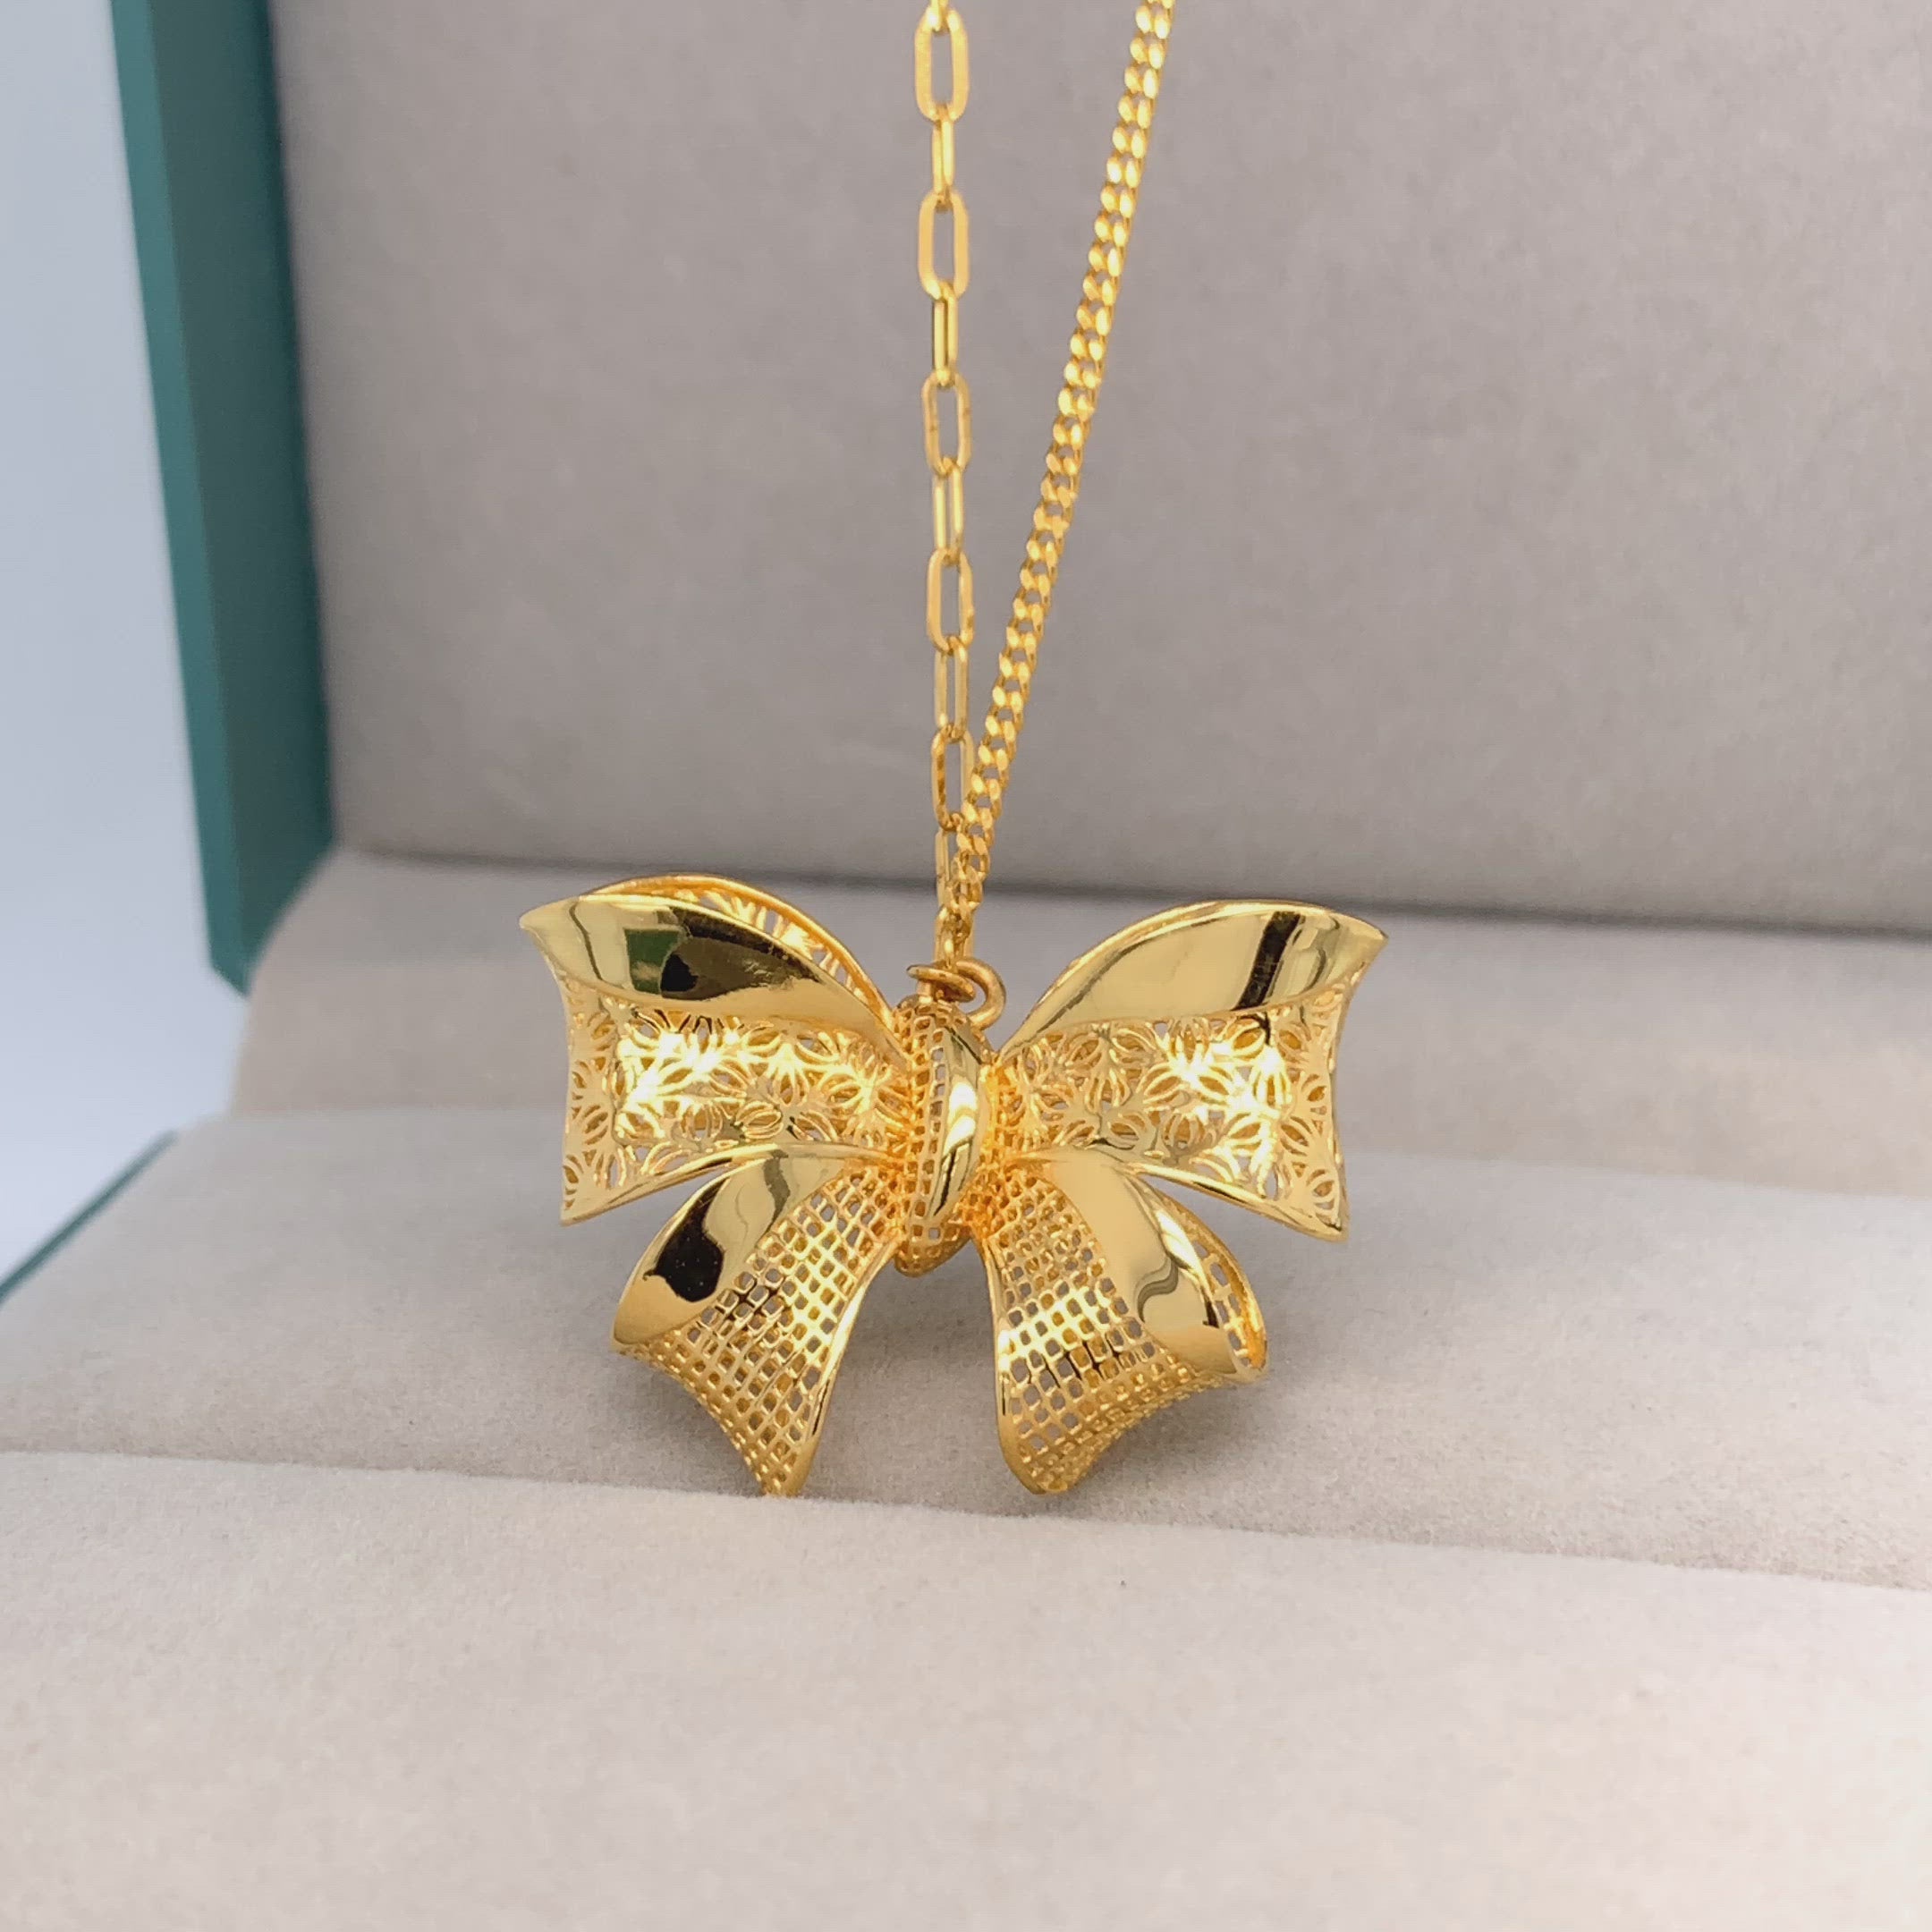 New 999 24K Yellow Gold Pendant Women 3D Gold Sweet Bow Necklace